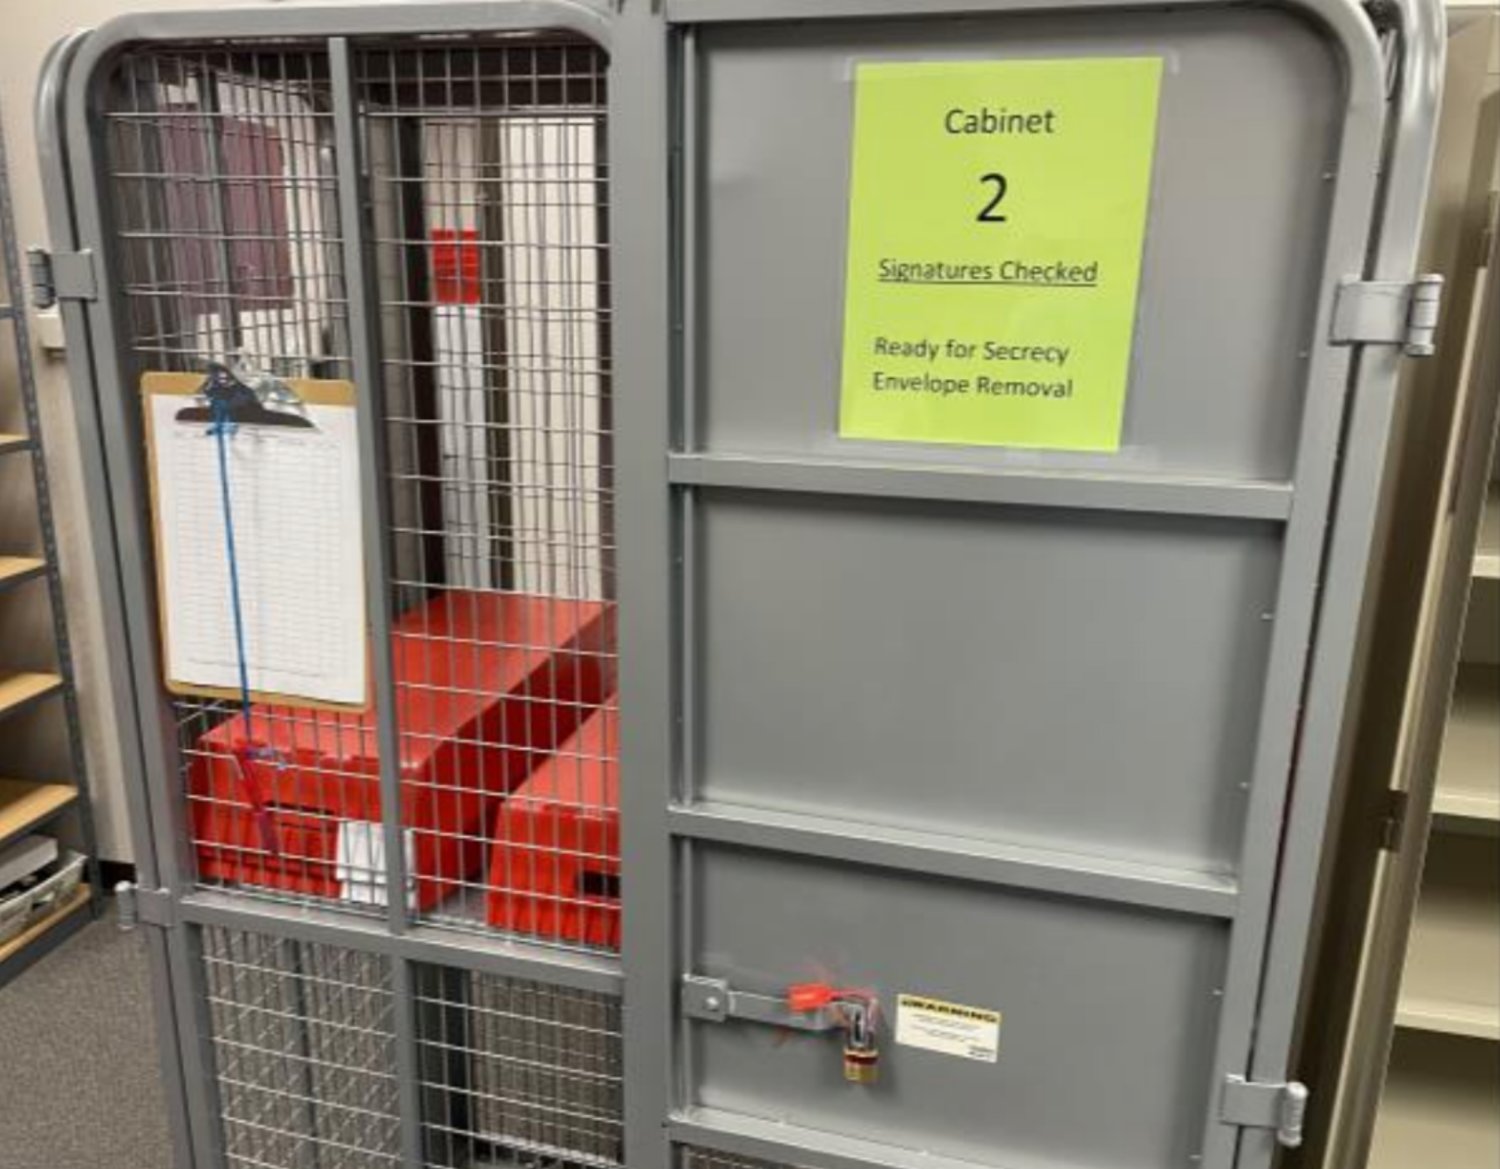 Ballots are secured in a locked cage inside the Lewis County Elections’ offices in this photo provided in a Lewis County news release.